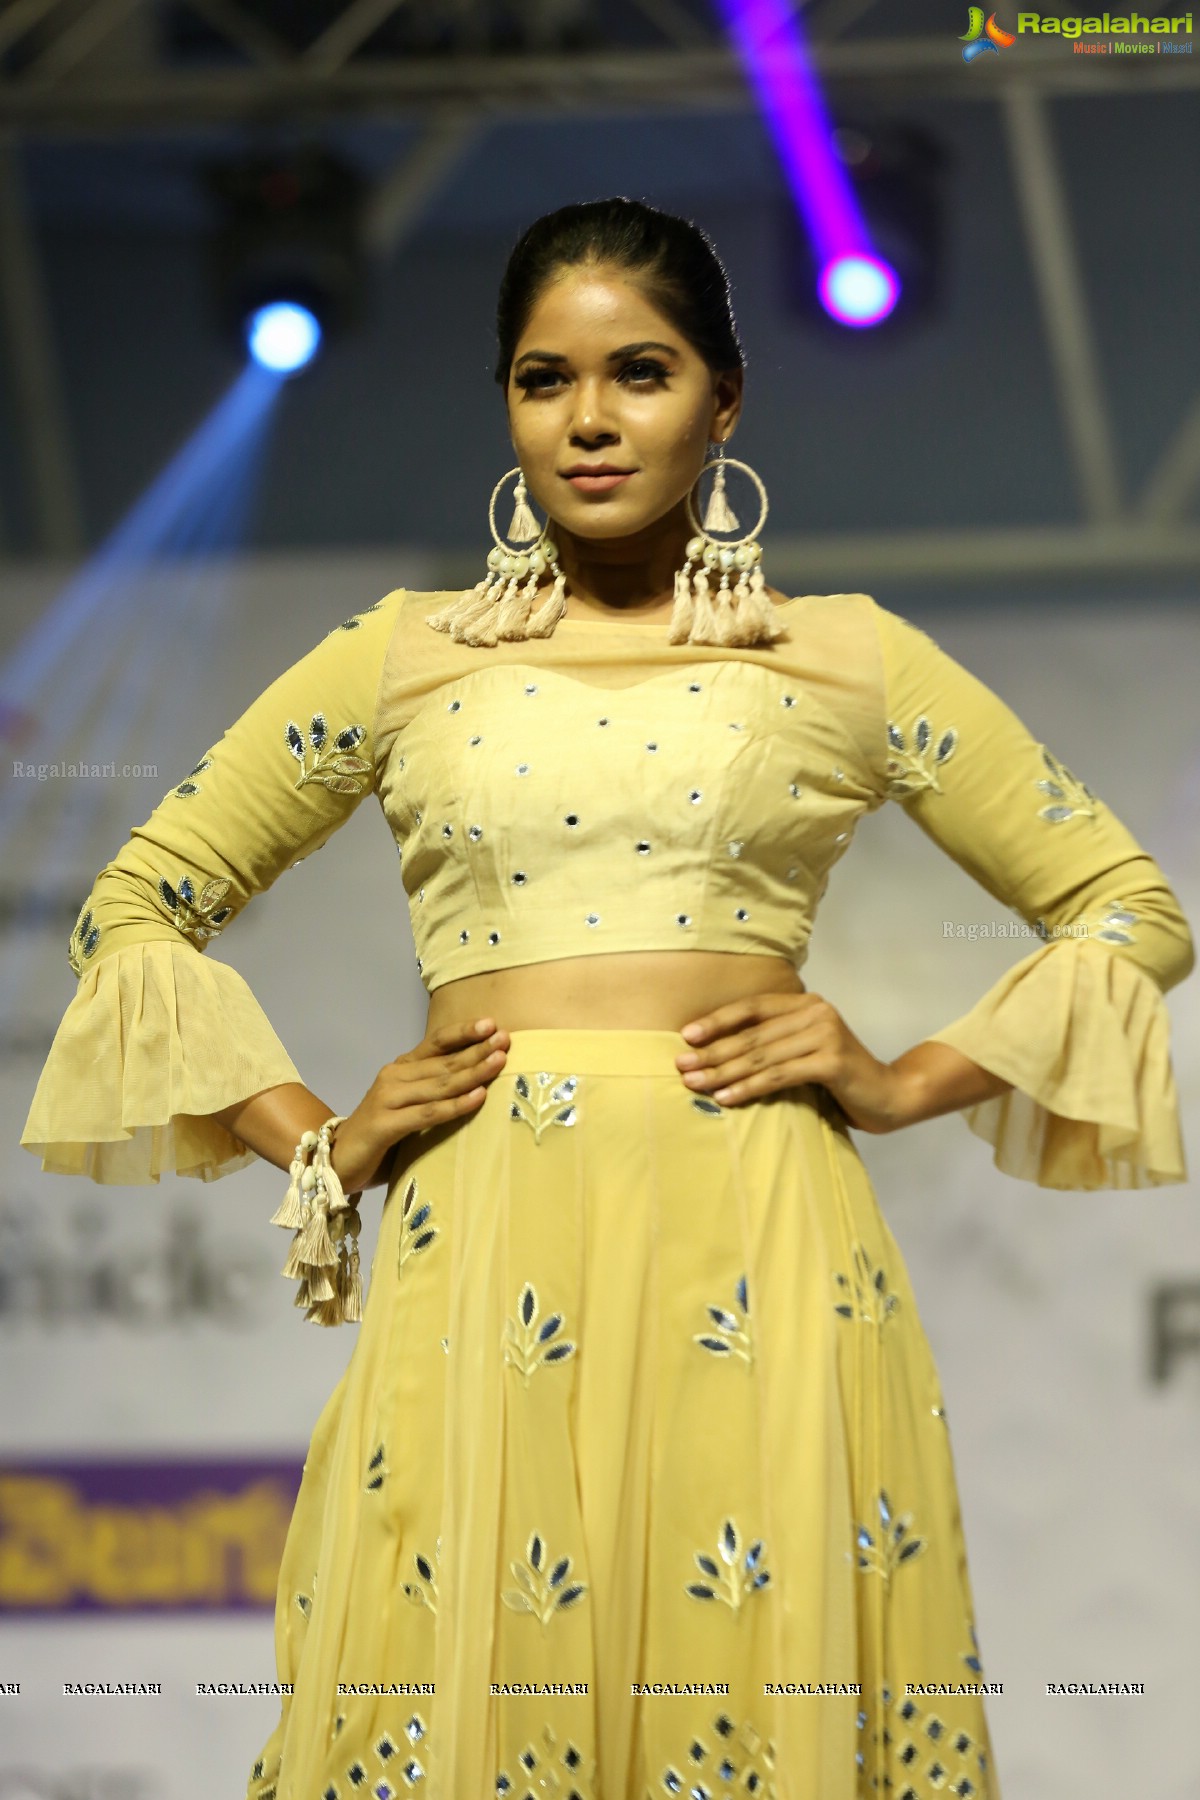 Hamstech Fashion Show 2019 at N-Convention